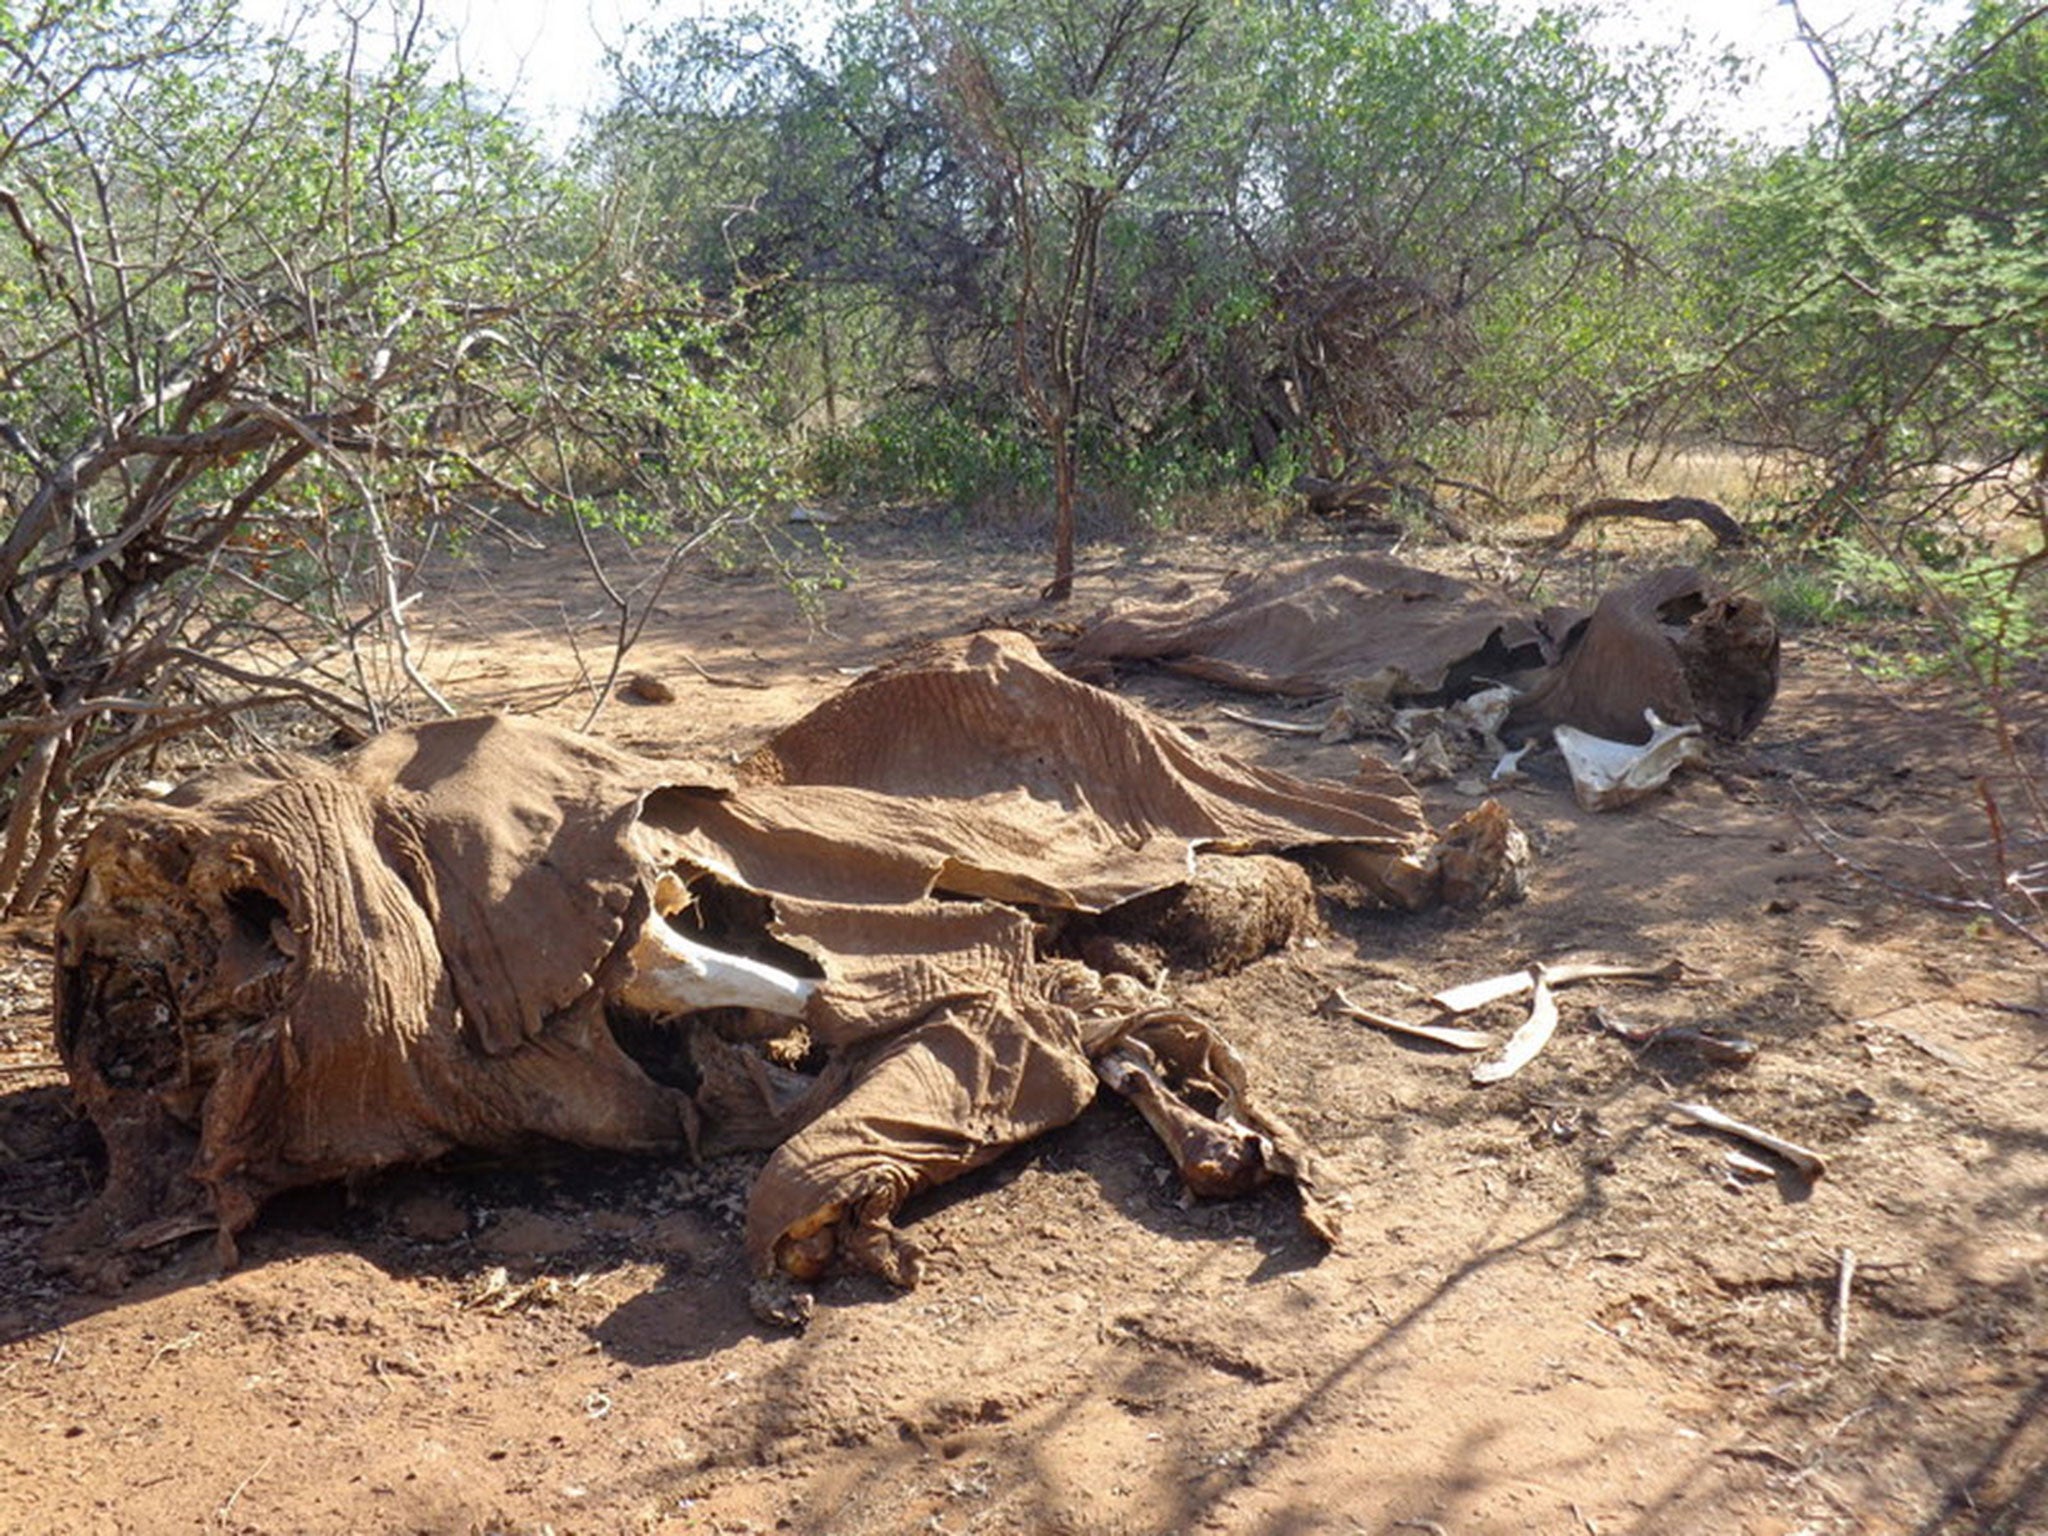 Two adult elephants killed in close proximity in northern Kenya. Clustered kills are a sign of professional poaching